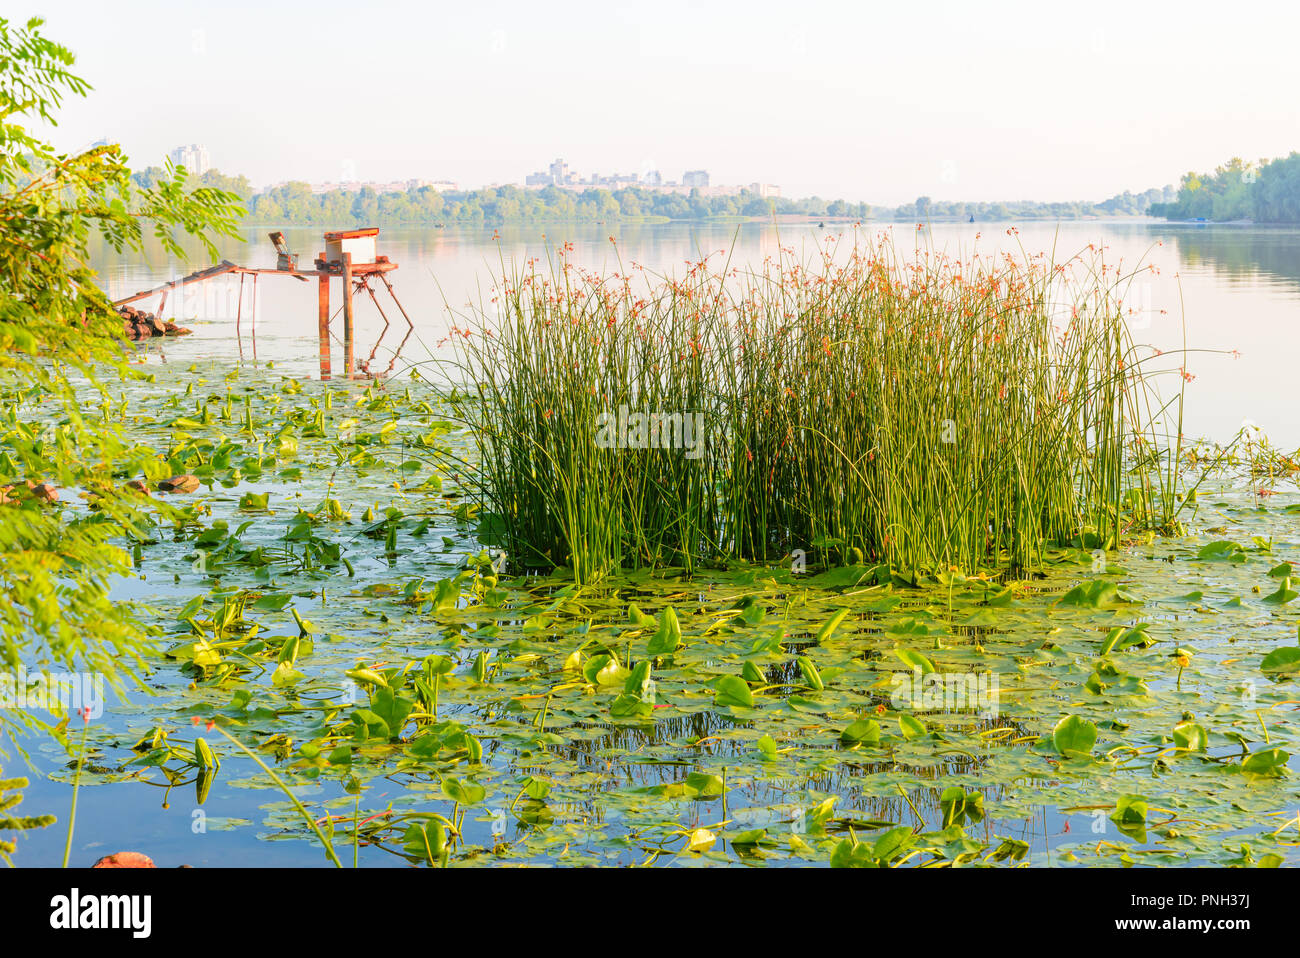 Scirpus plants and yellow waterlily in the misty Dnieper river in Kiev, Ukraine, at sunrise Stock Photo